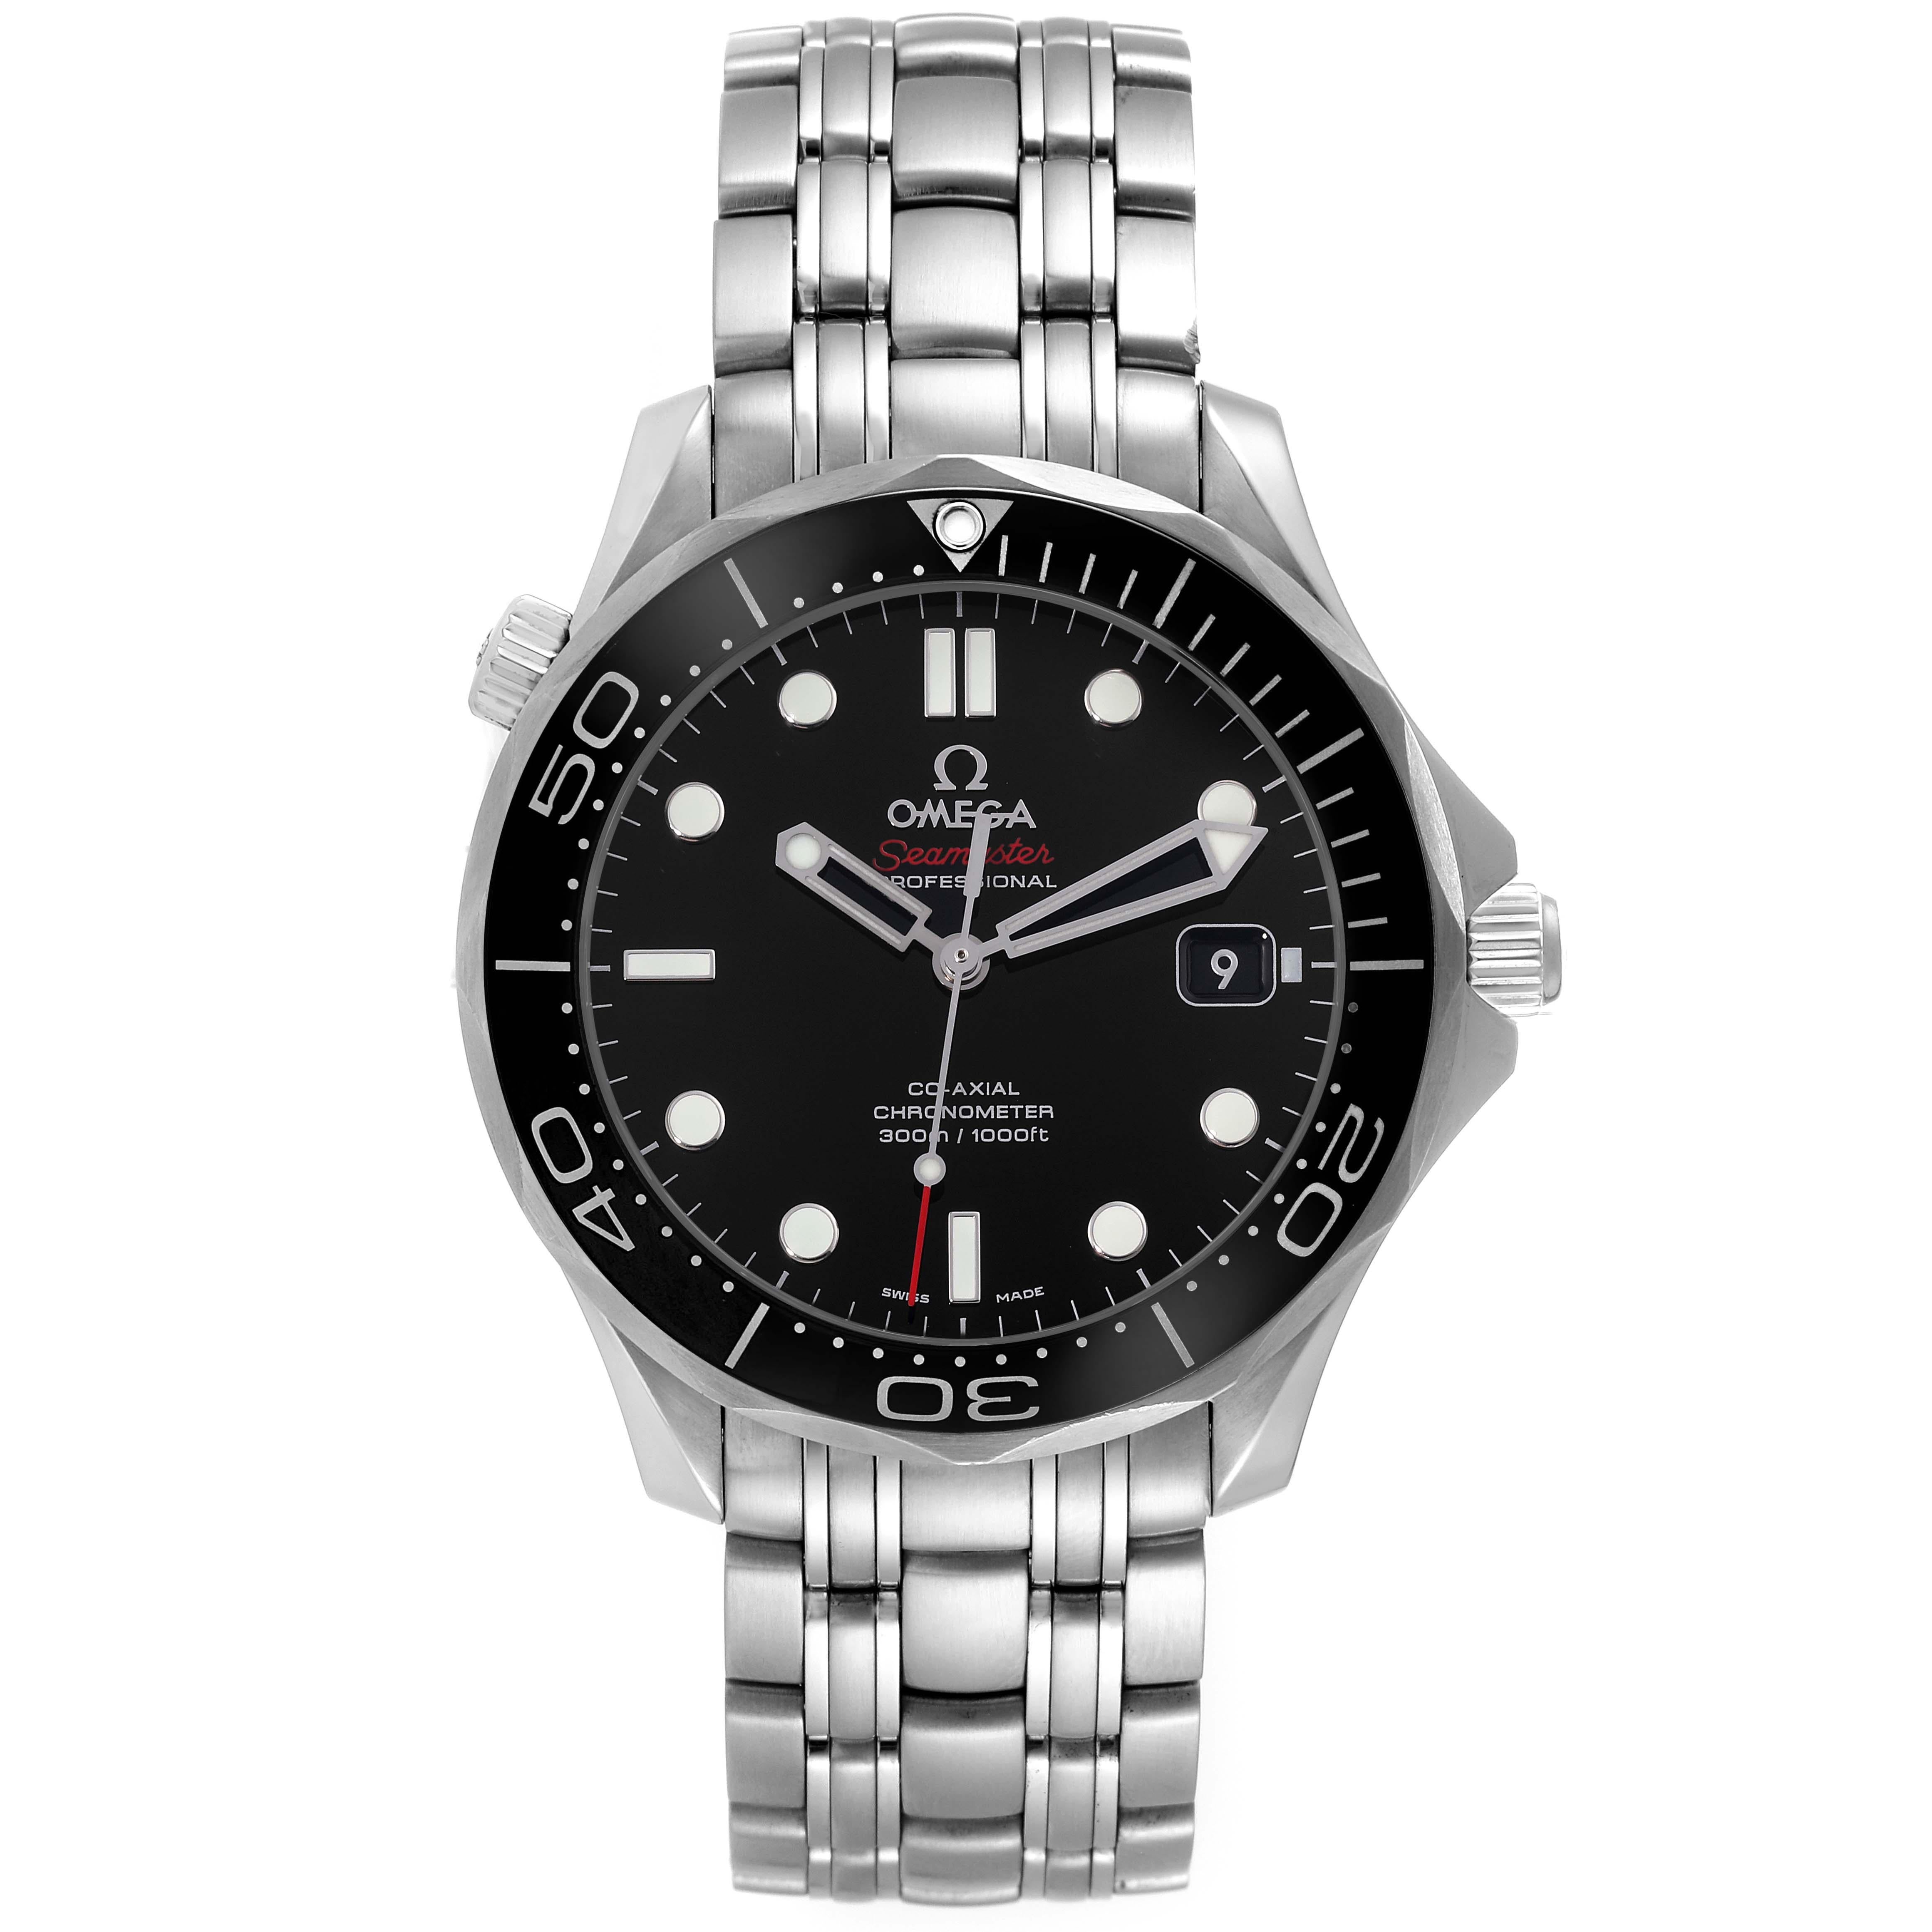 Omega Seamaster Diver 300M Steel Mens Watch 212.30.41.20.01.003 Box Card. Automatic self-winding chronometer, Co-Axial Escapement movement. Stainless steel case 41 mm in diameter. Helium escape valve at 10 o'clock. Omega logo on the crown. Black